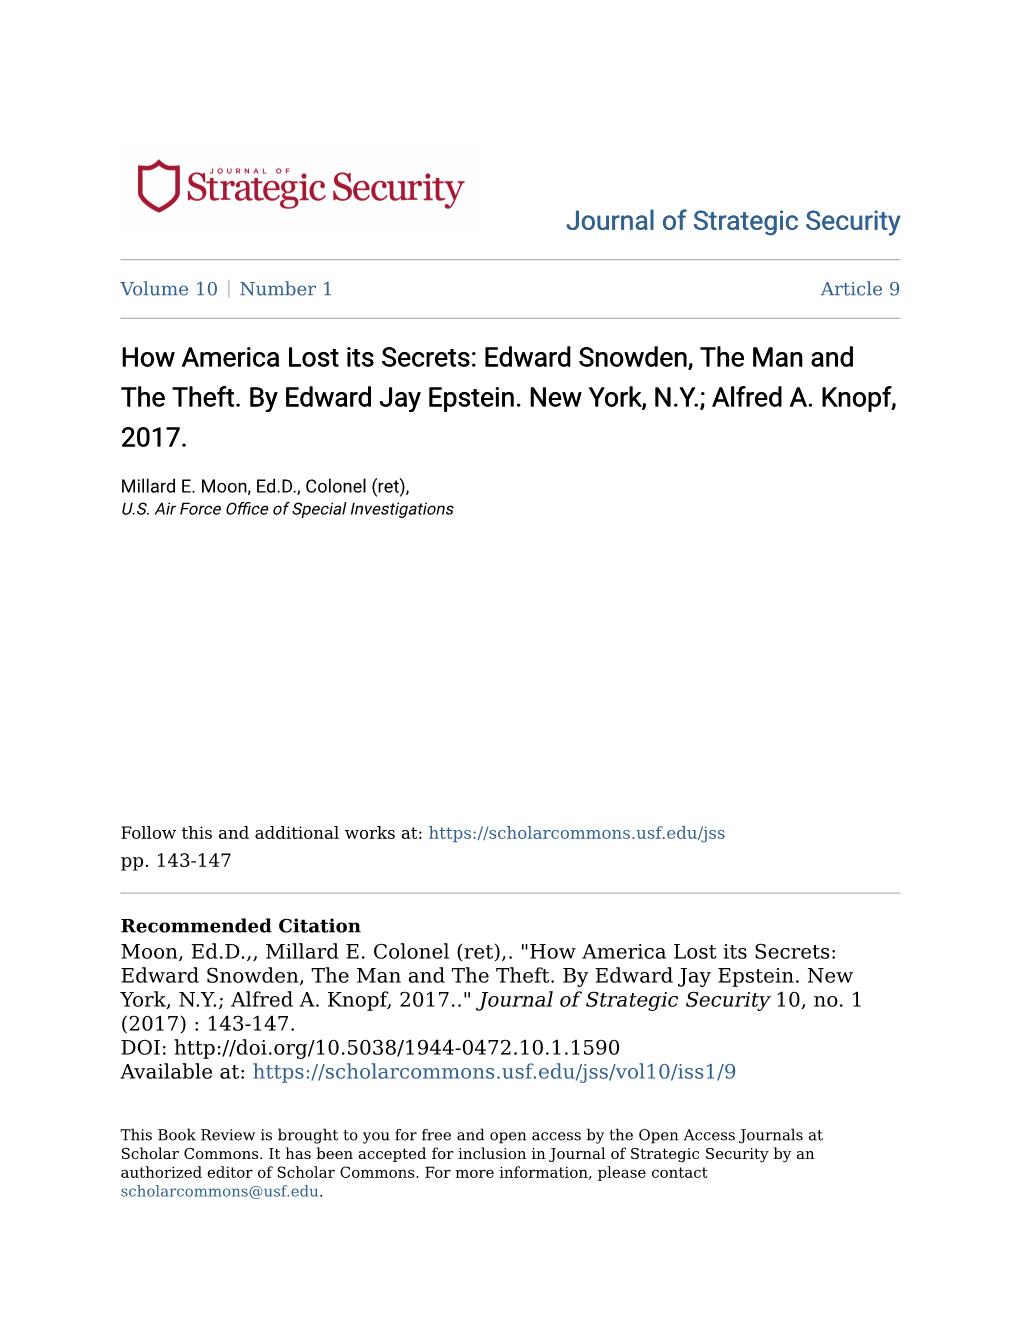 How America Lost Its Secrets: Edward Snowden, the Man and the Theft. by Edward Jay Epstein. New York, N.Y.; Alfred A. Knopf, 2017